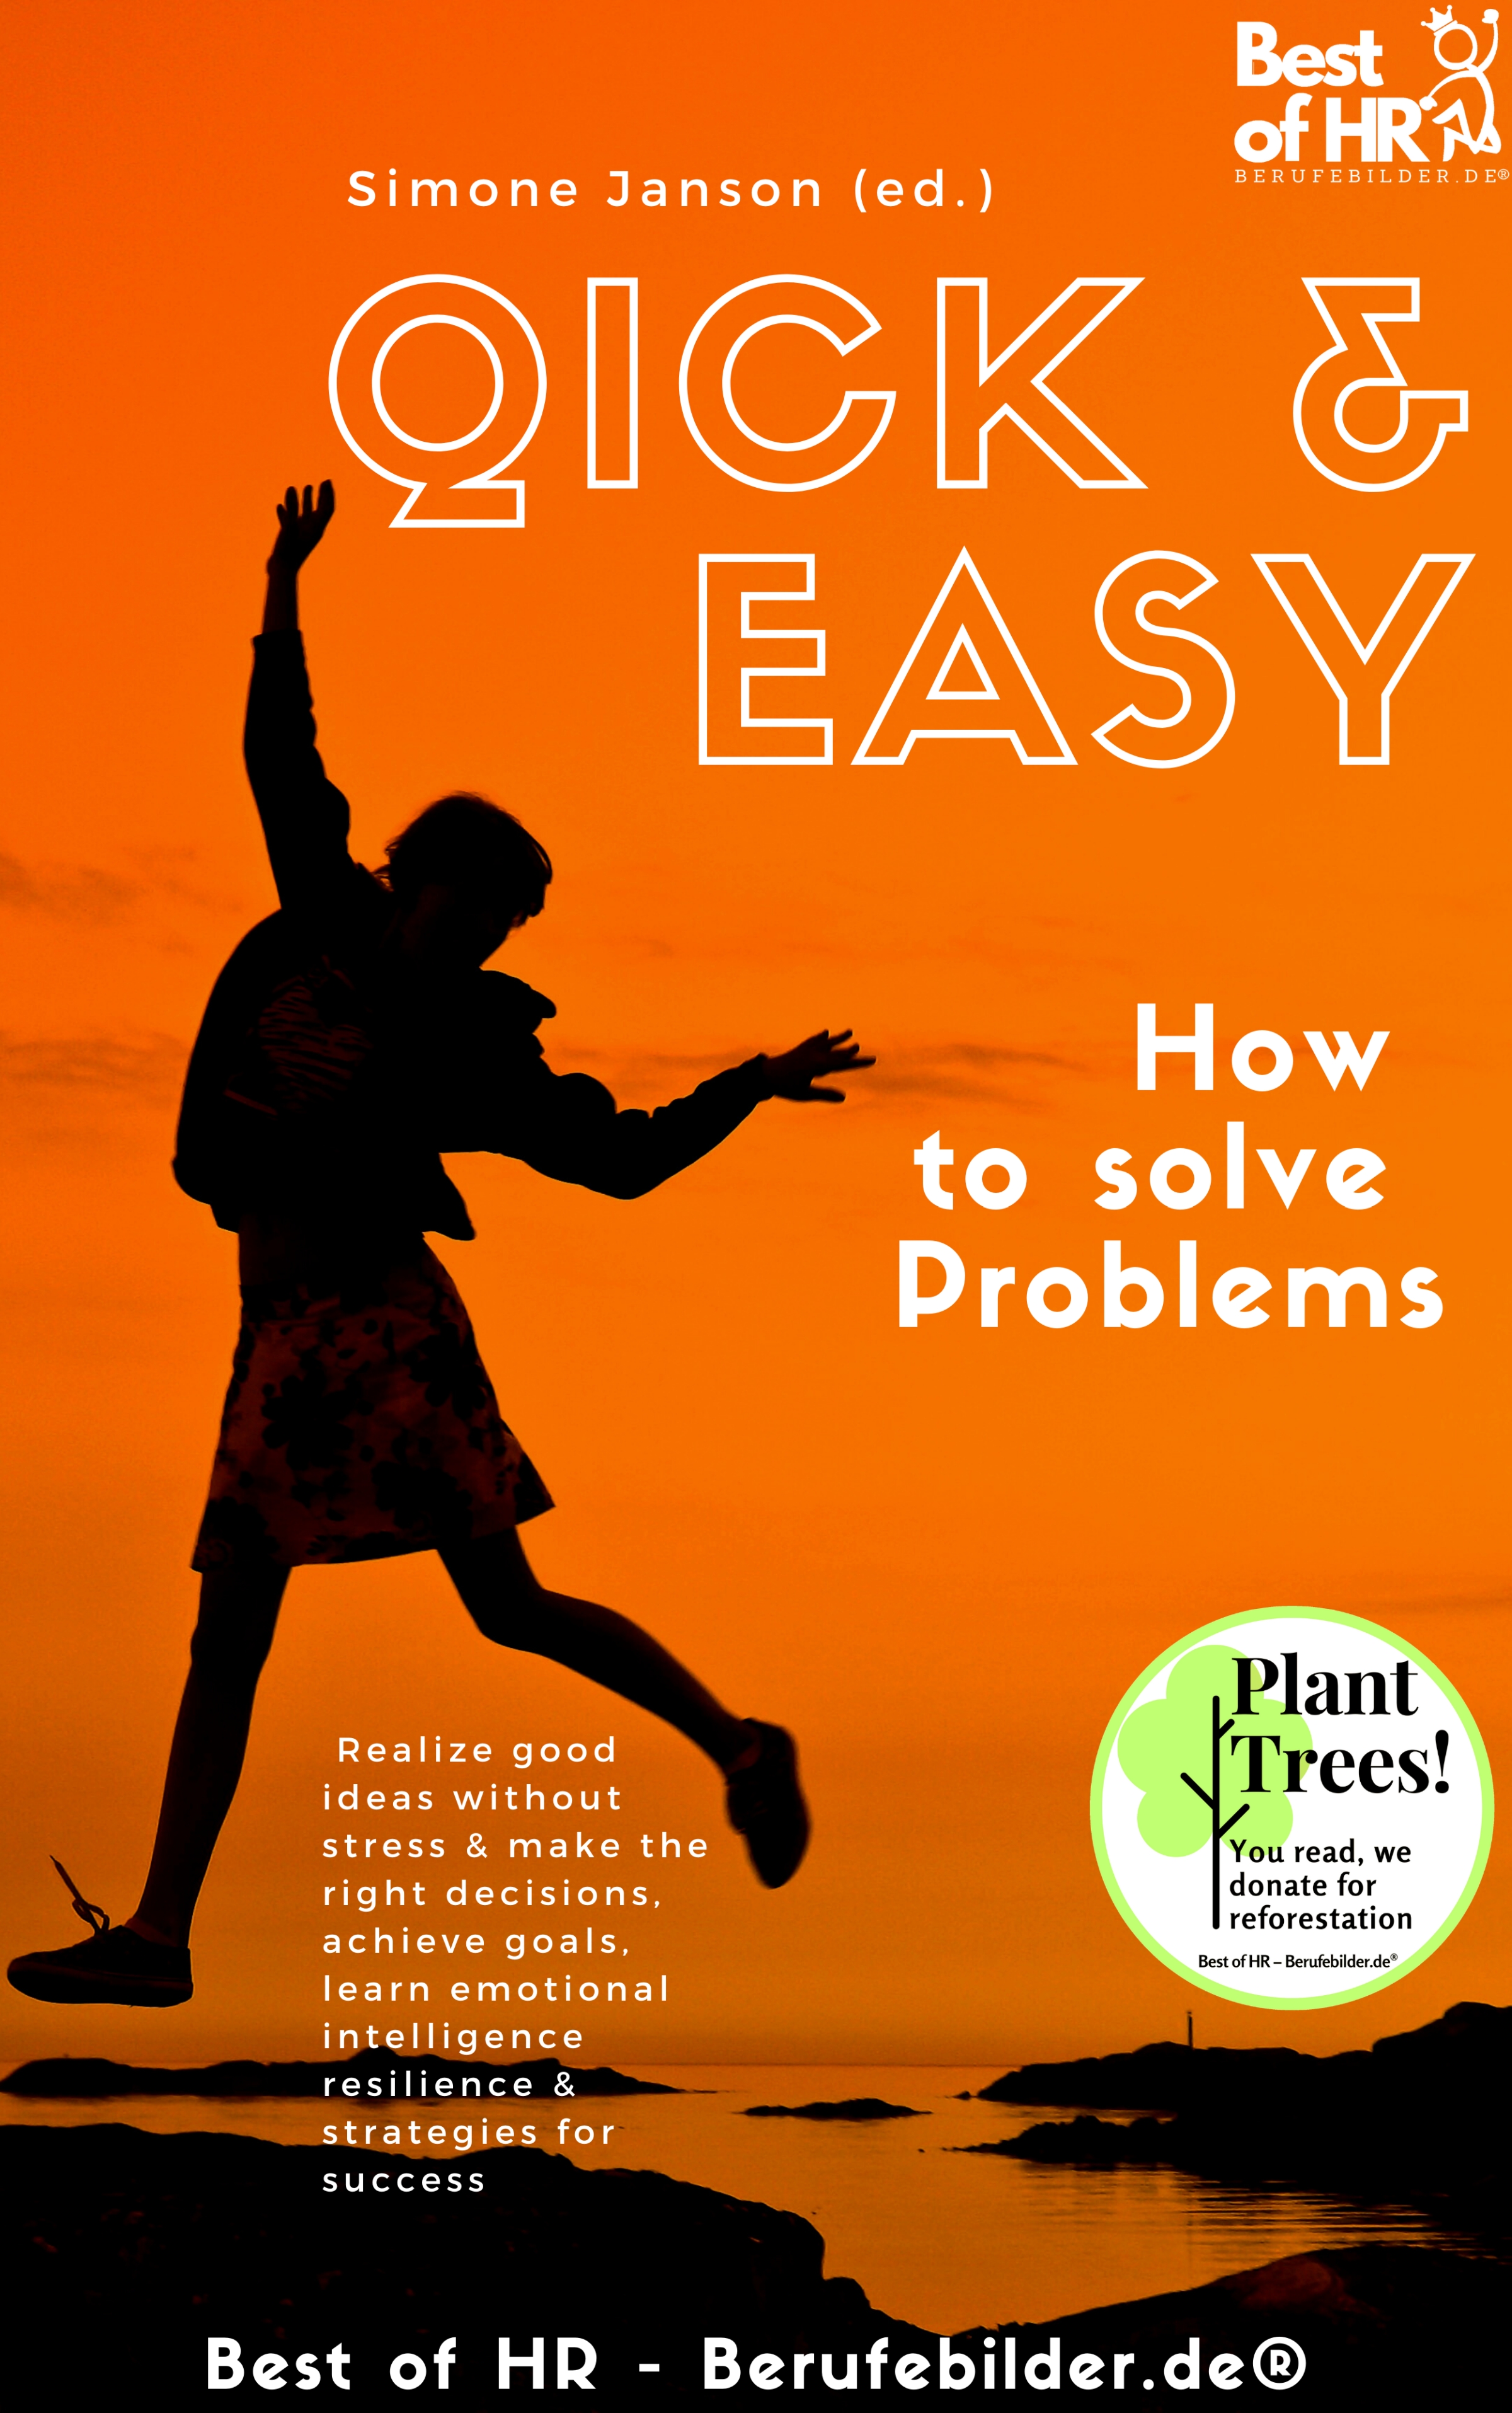 Quick & Easy. How to solve Problems